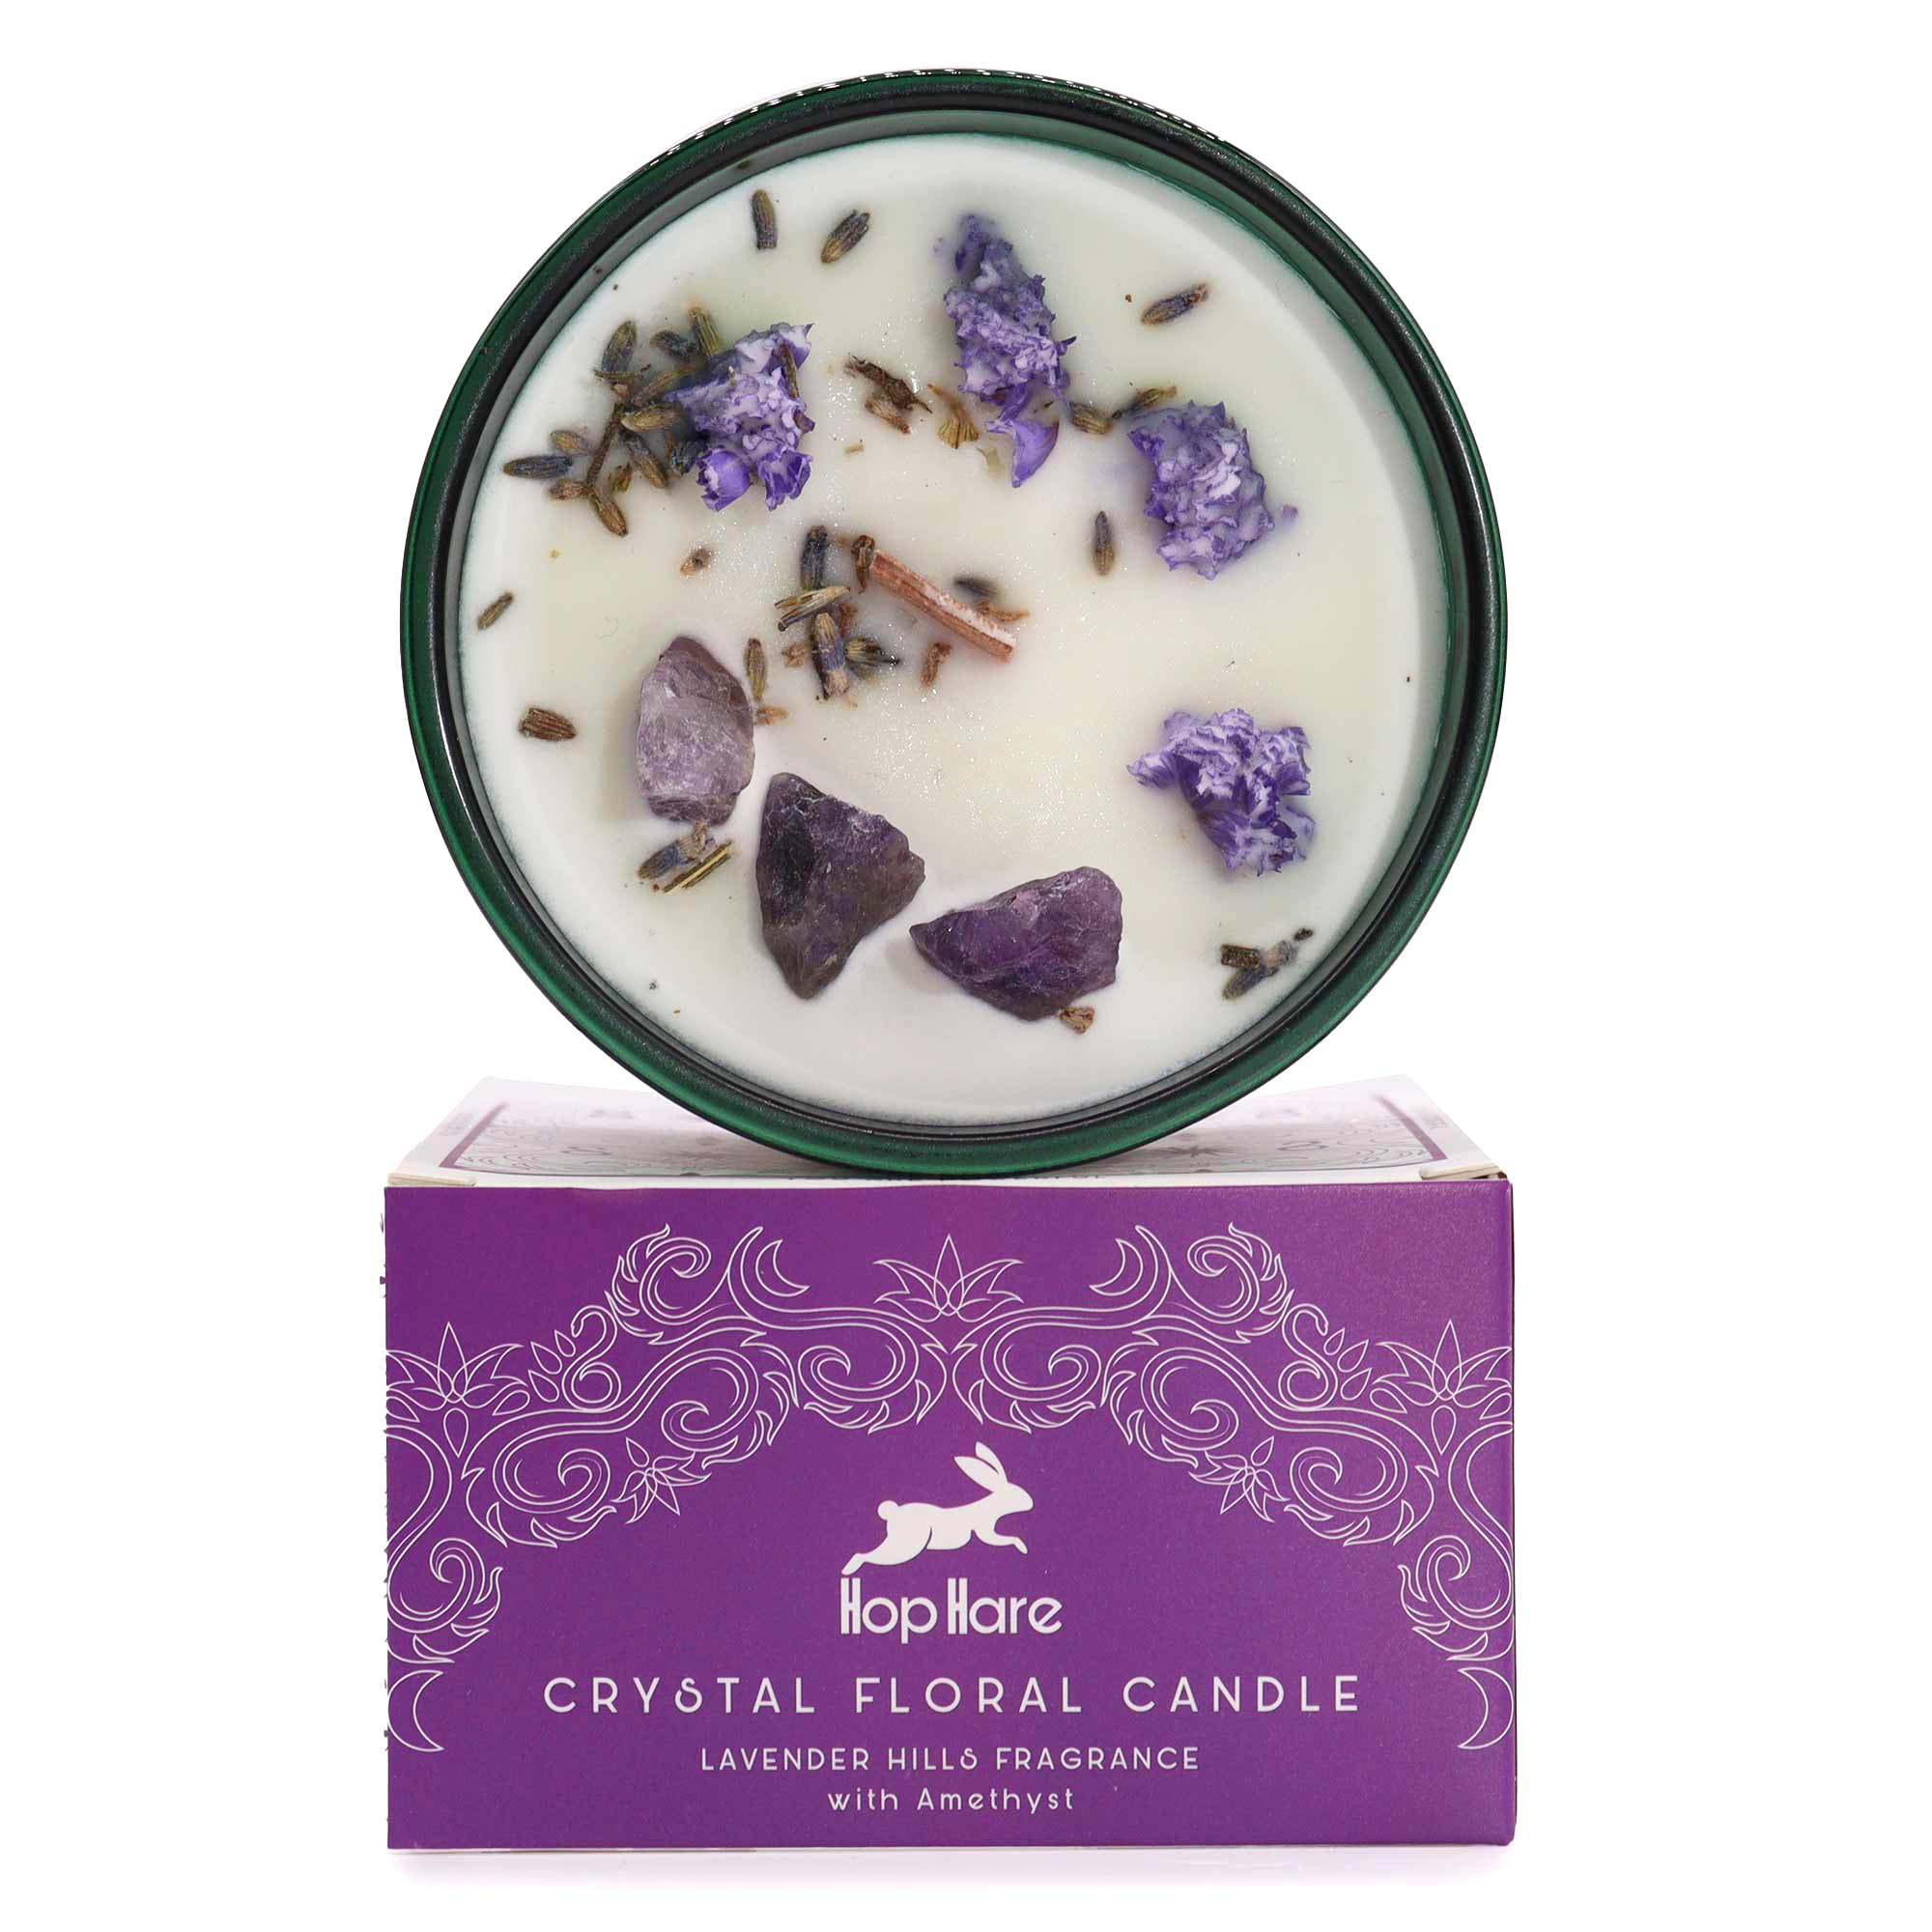 View Hop Hare Crystal Magic F10er Candle The Moon information